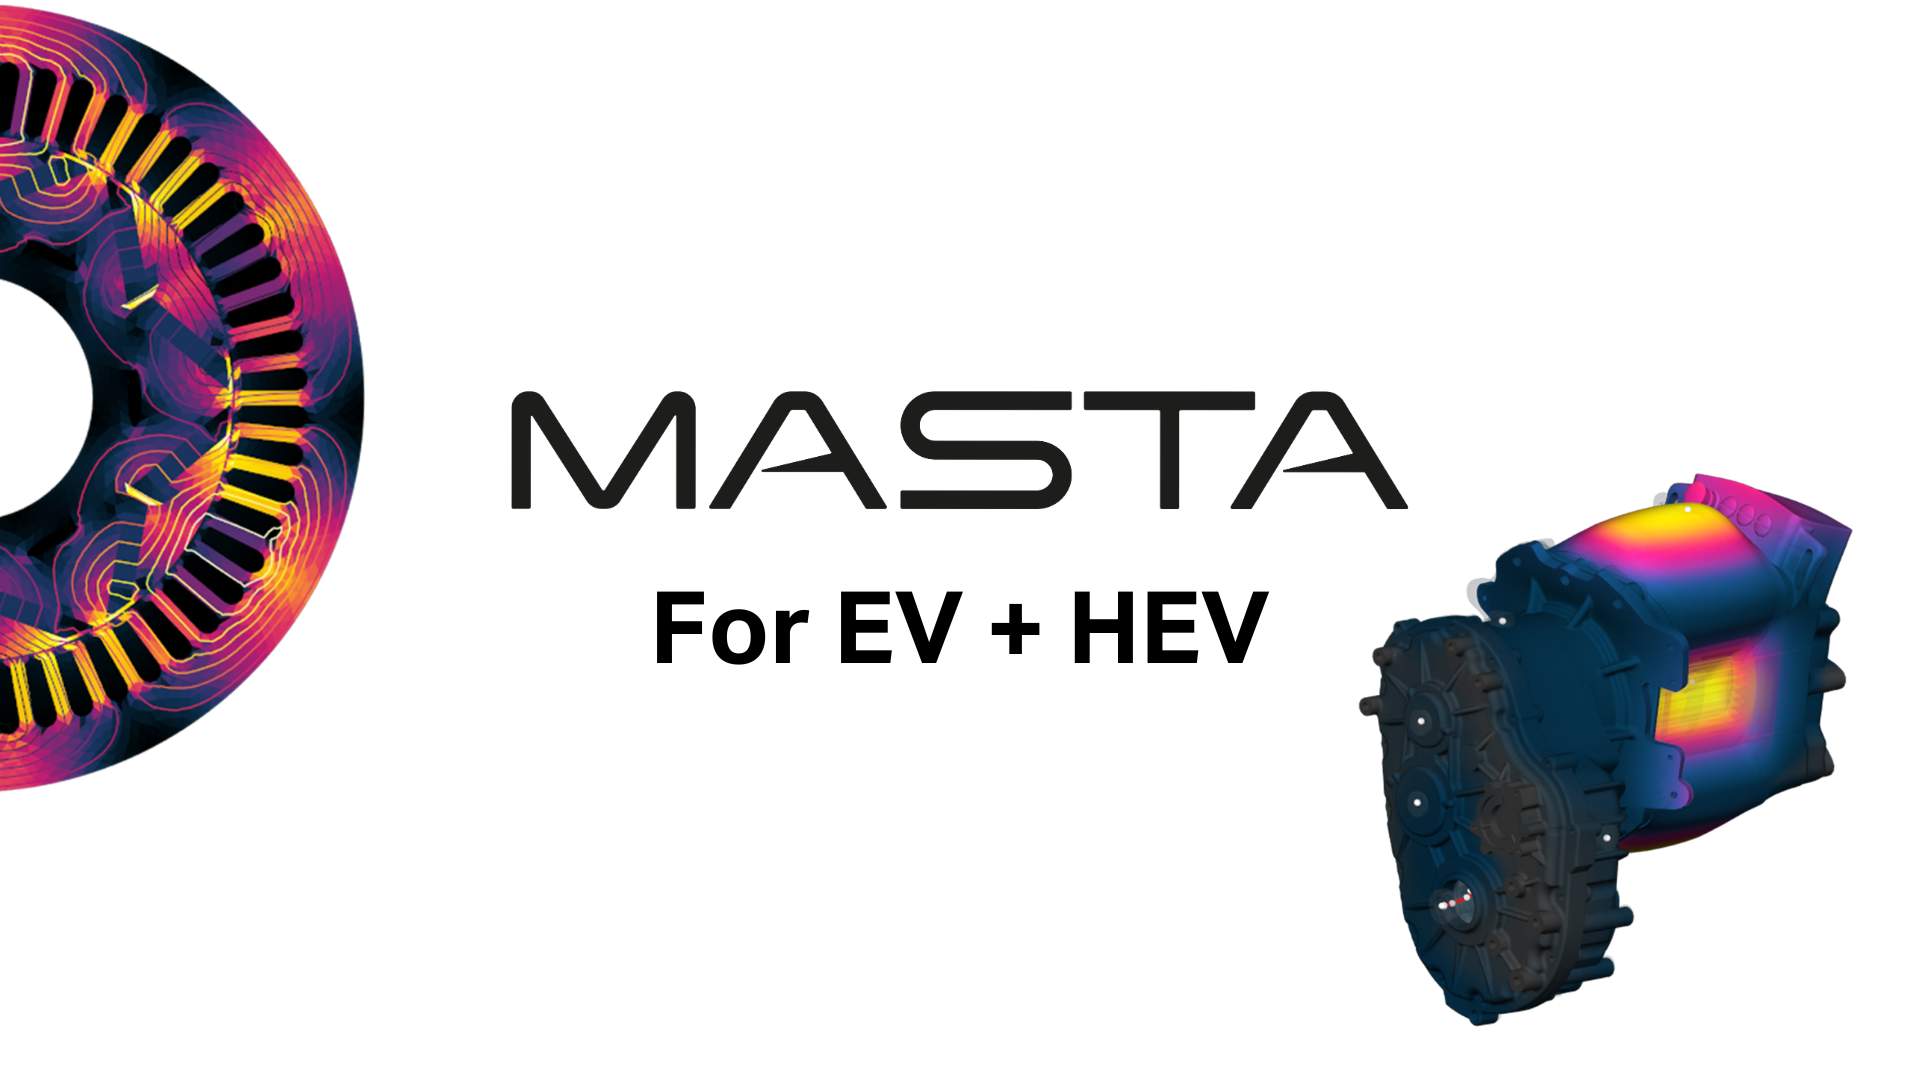 MASTA for EV and HEV applications.